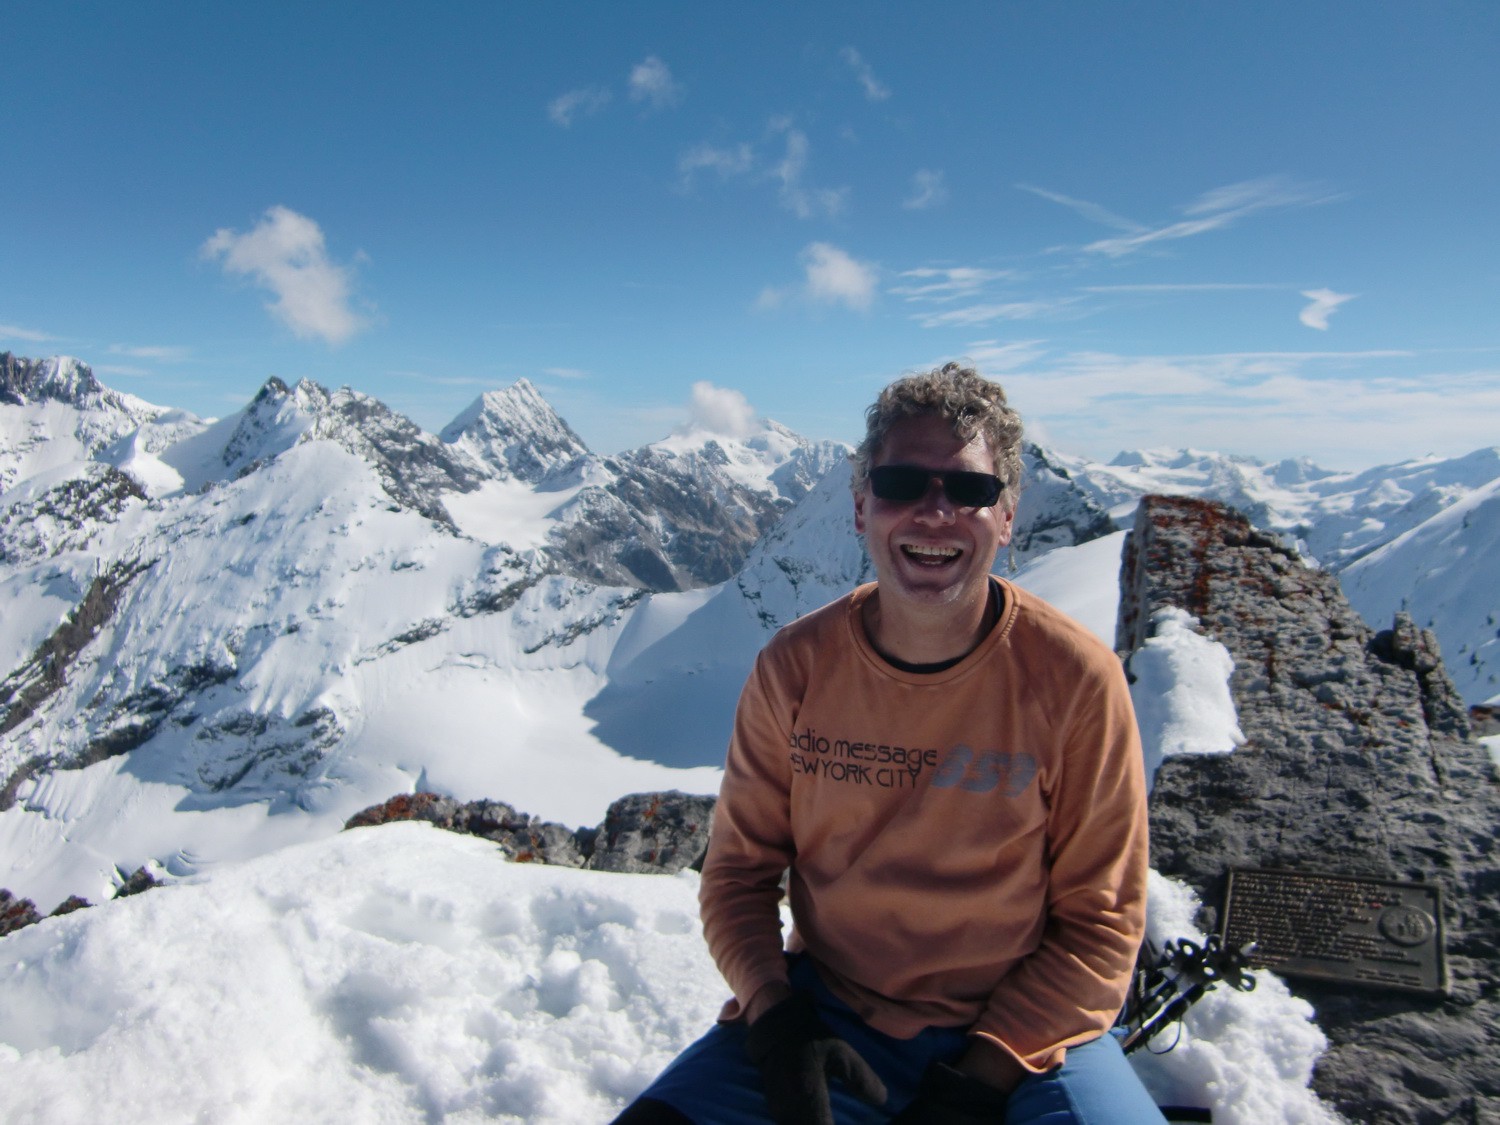 On top of Punta degli Spriti (Geisterspitze) in the Ortler group. Koenigsspitze in the background